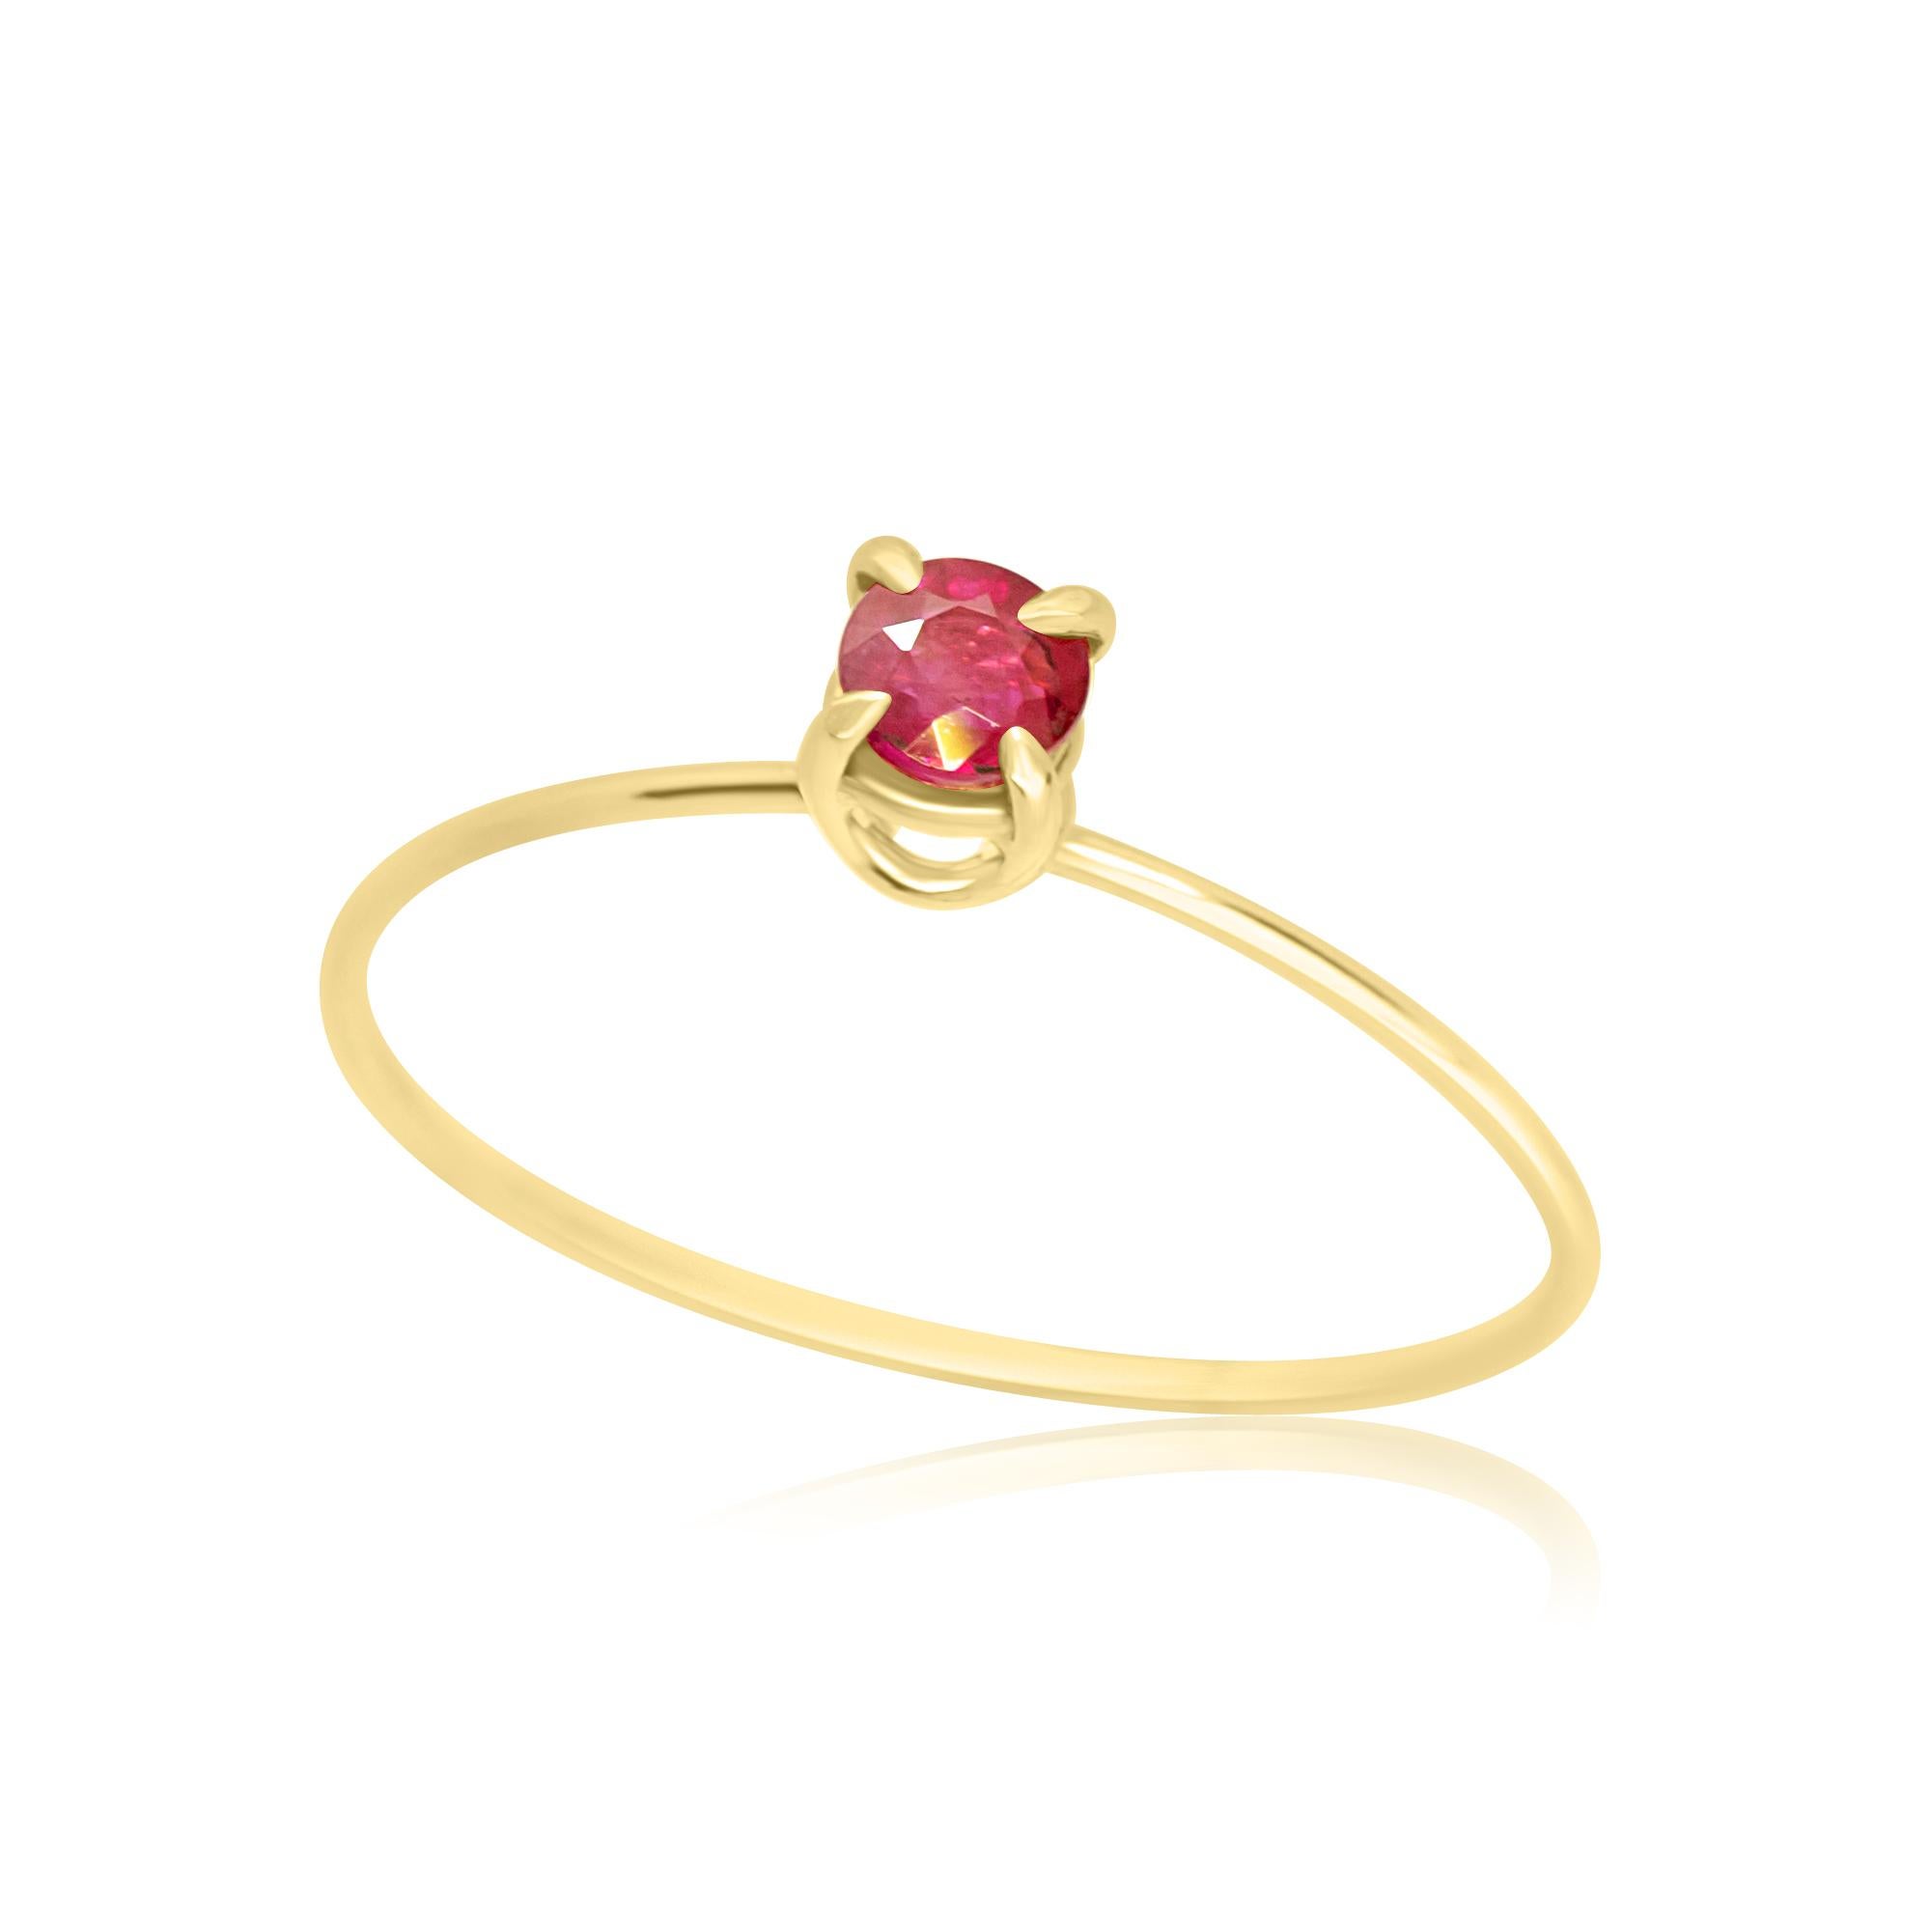 Stunning and magnificent ruby ring with 9 karat yellow gold. This epic jewellery piece is an outstanding display of quality and Italian handmade royal craftsmanship. Create a fashionable look full of light and desire. This handmade ring will